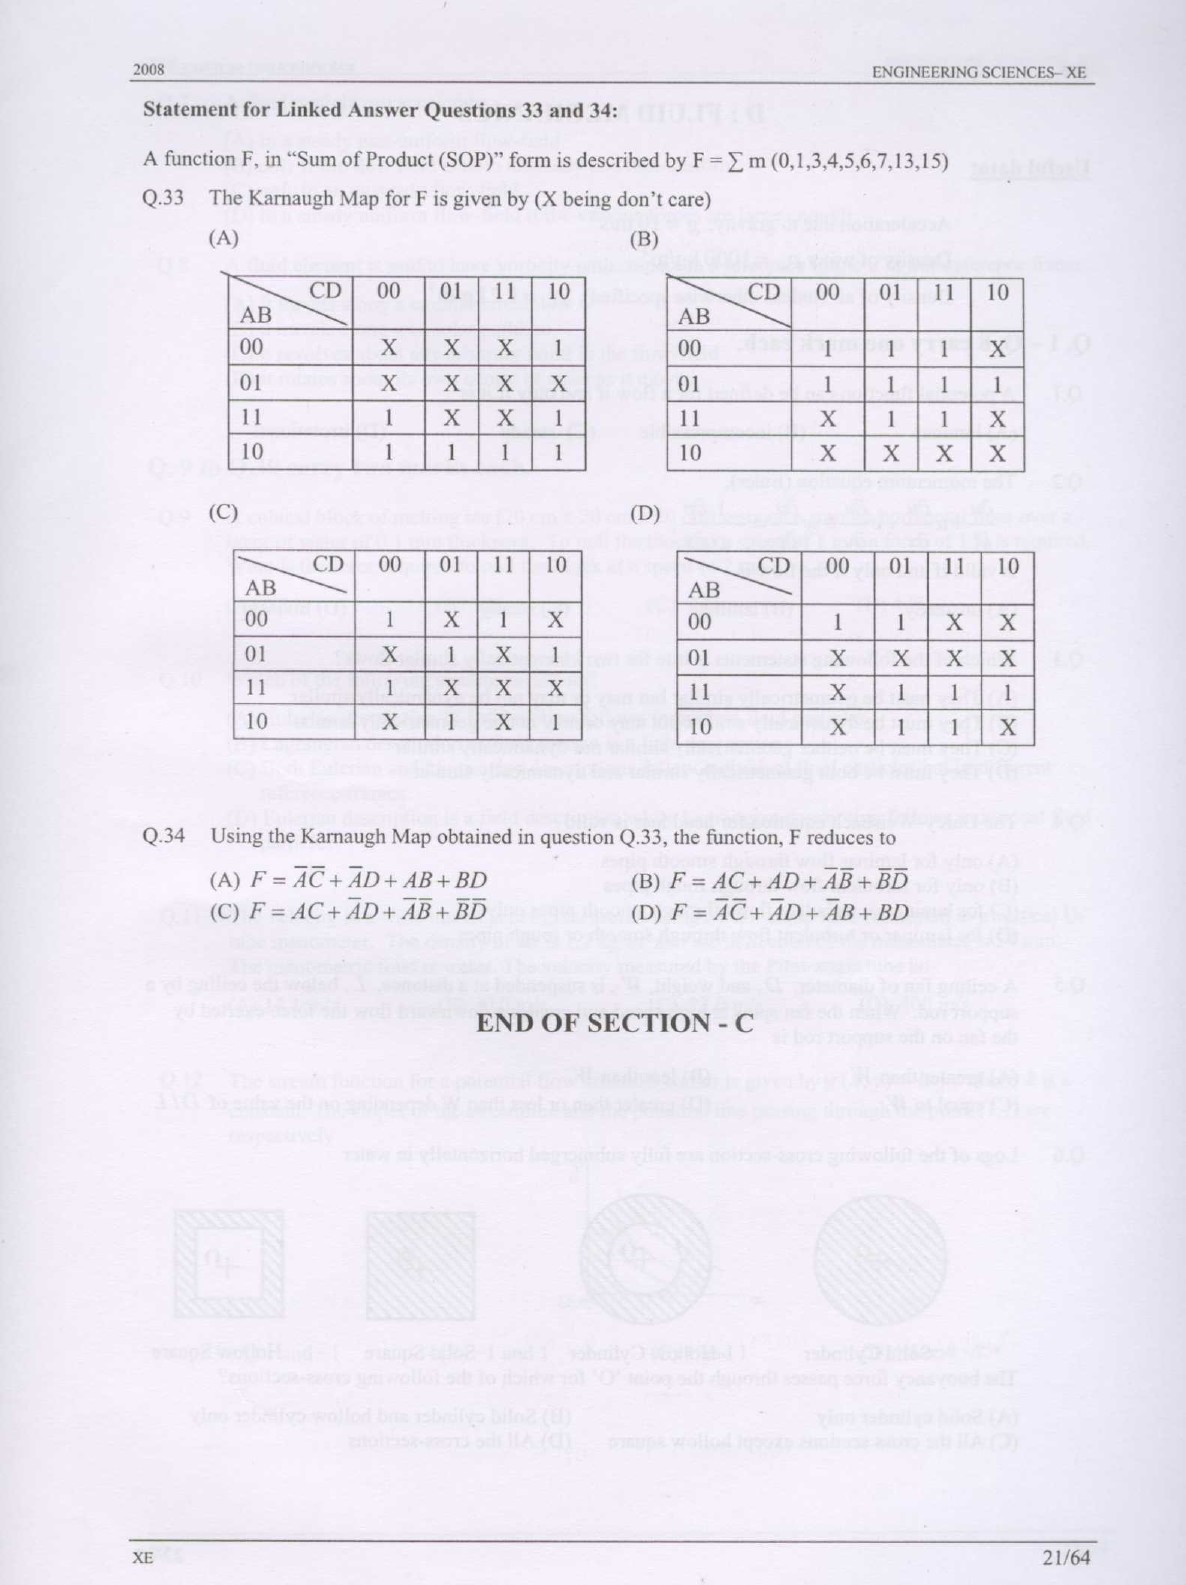 GATE Exam Question Paper 2008 Engineering Sciences 21